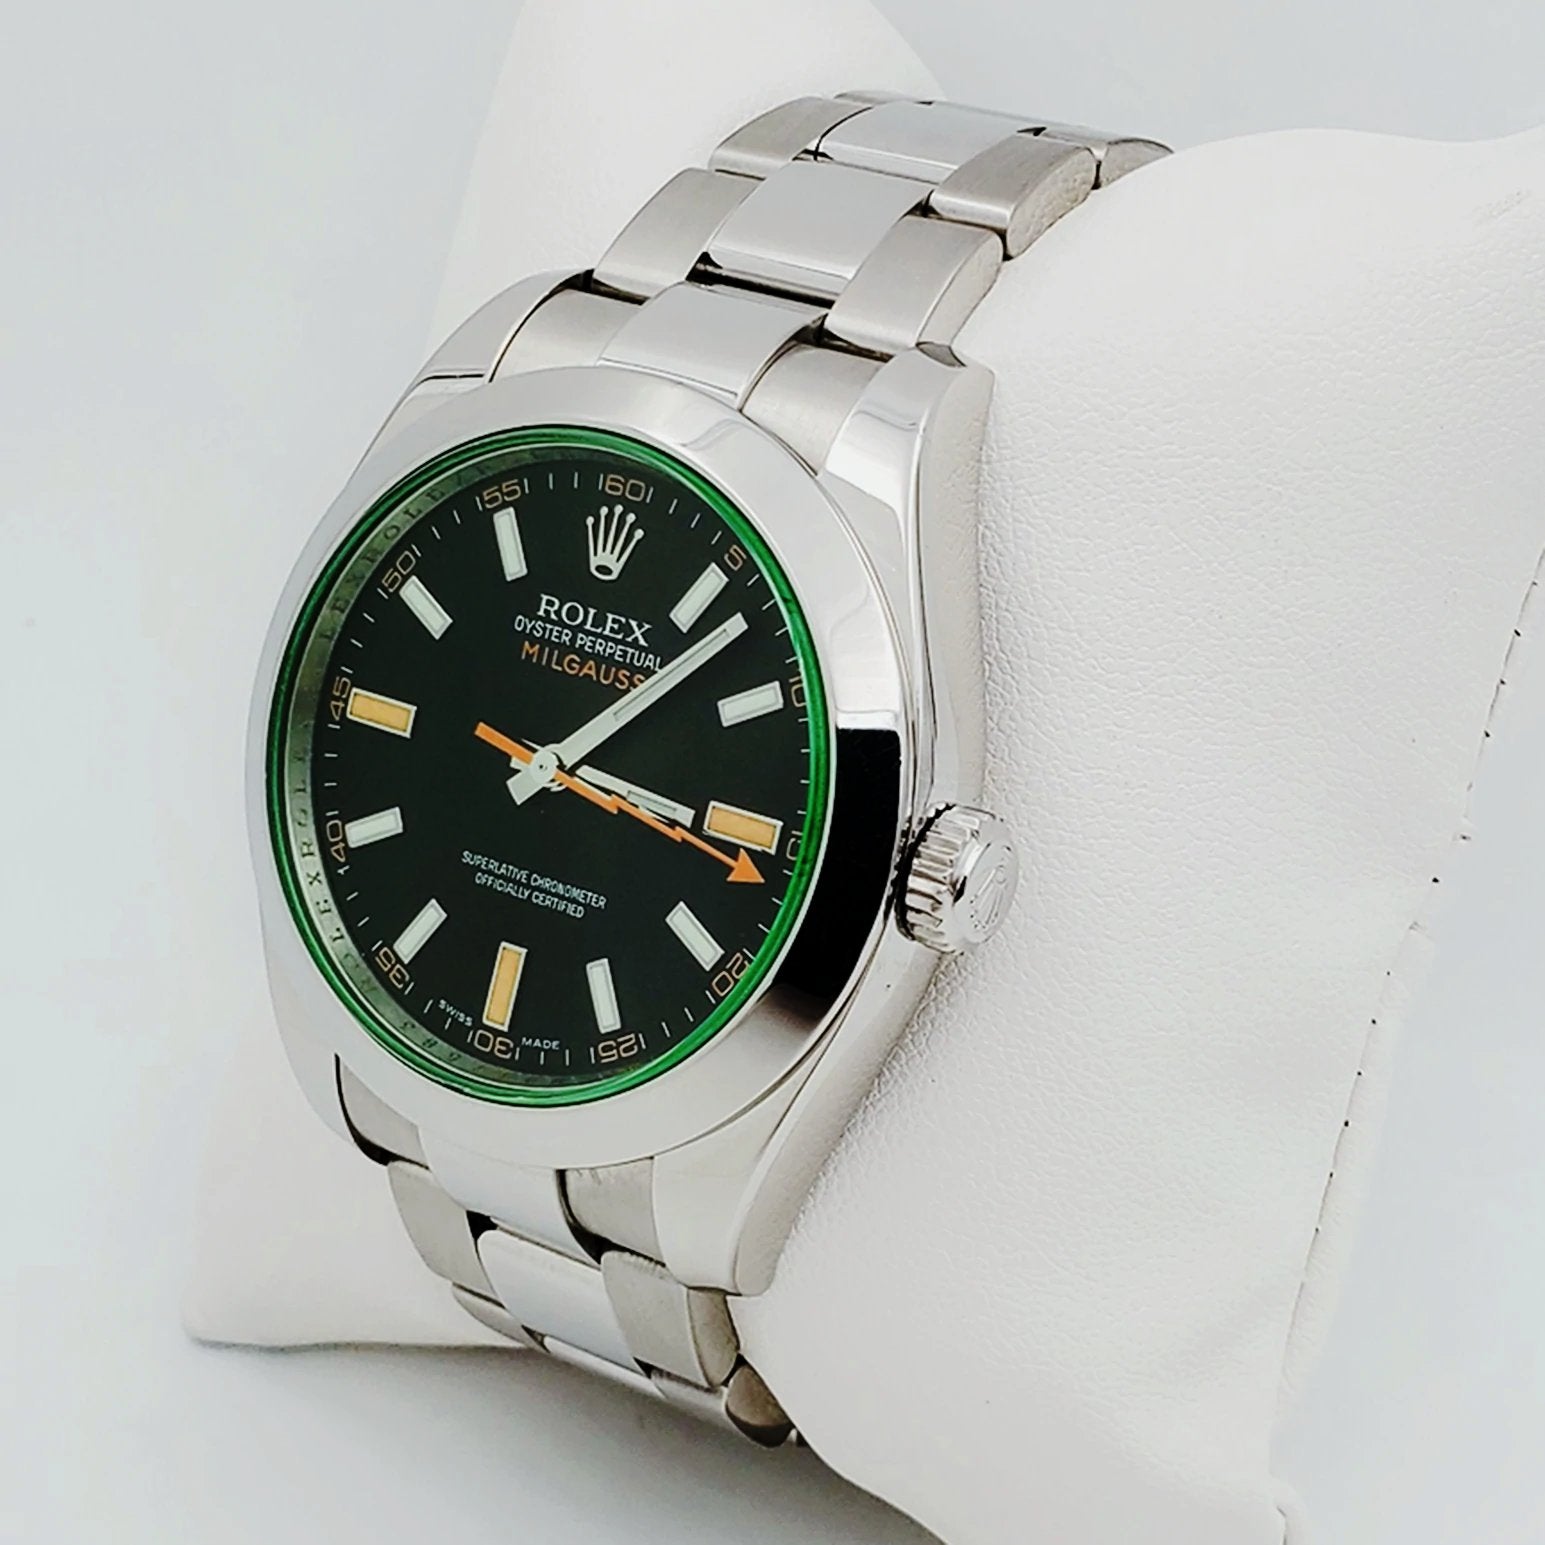 Men's Rolex 40mm Milgauss Oyster Perpetual Stainless Steel Watch with Green Sapphire Crystal Dial. (NEW 116400GV)